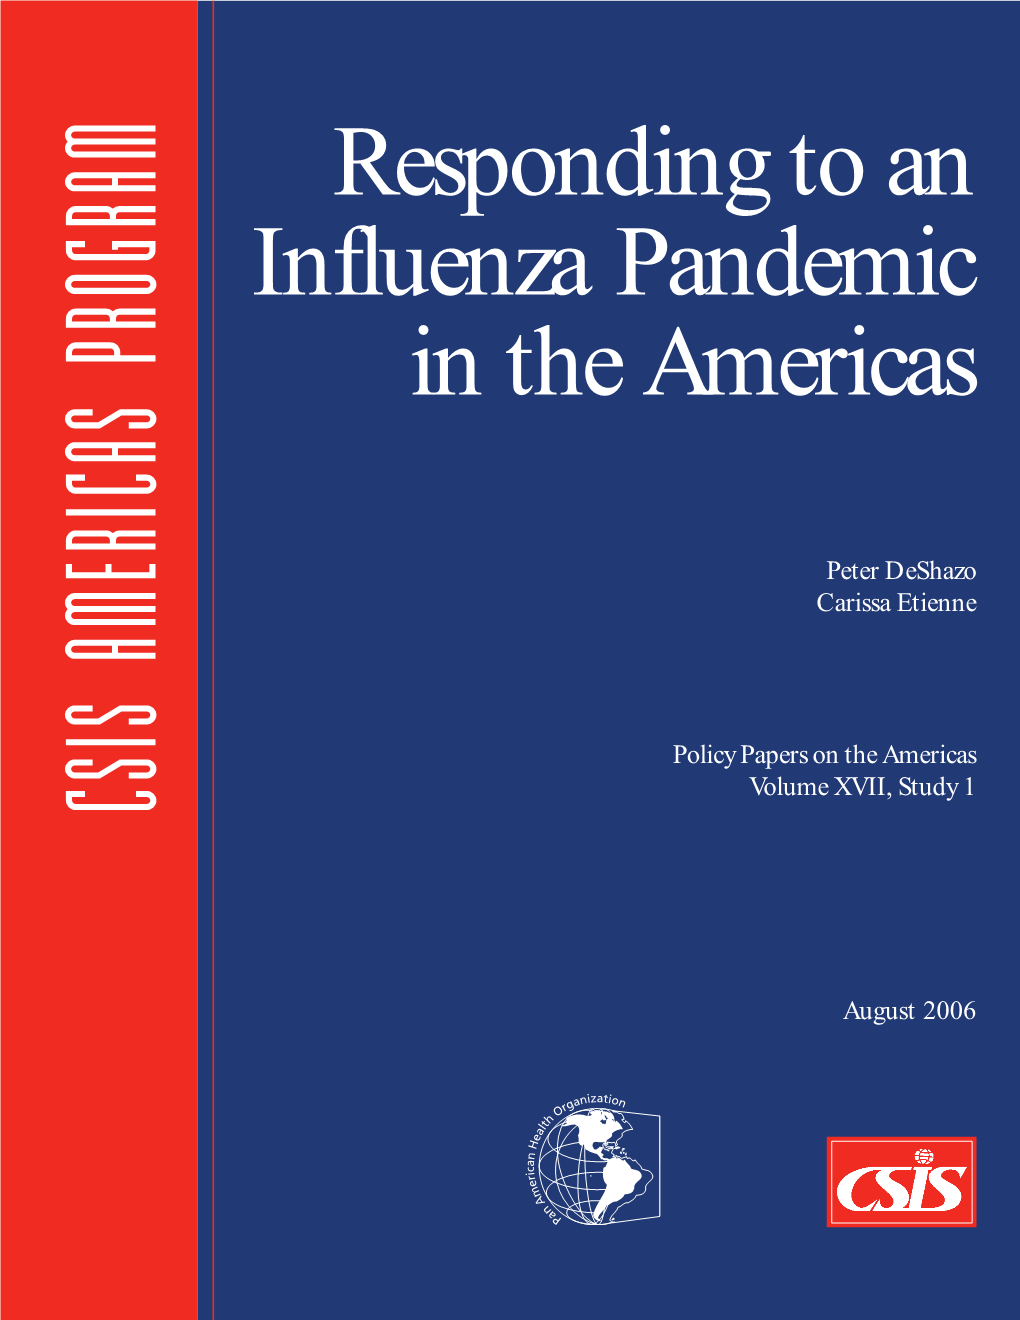 Responding to an Influenza Pandemic in the Americas